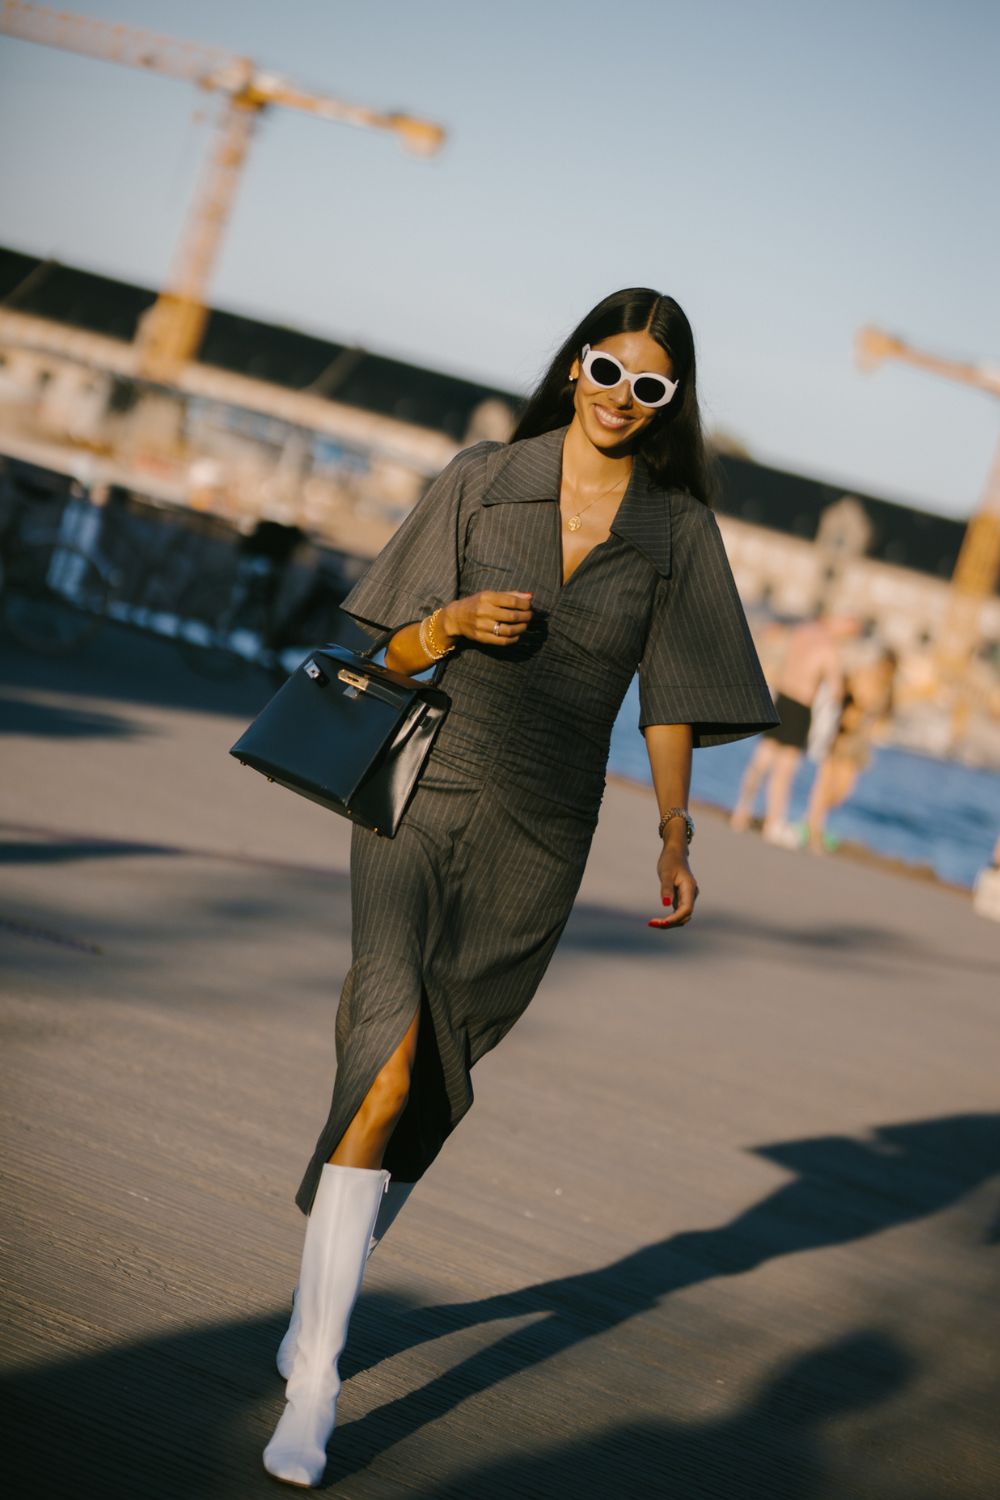 I Have End Of Summer Outfit Fatigue: These Street Style Looks From